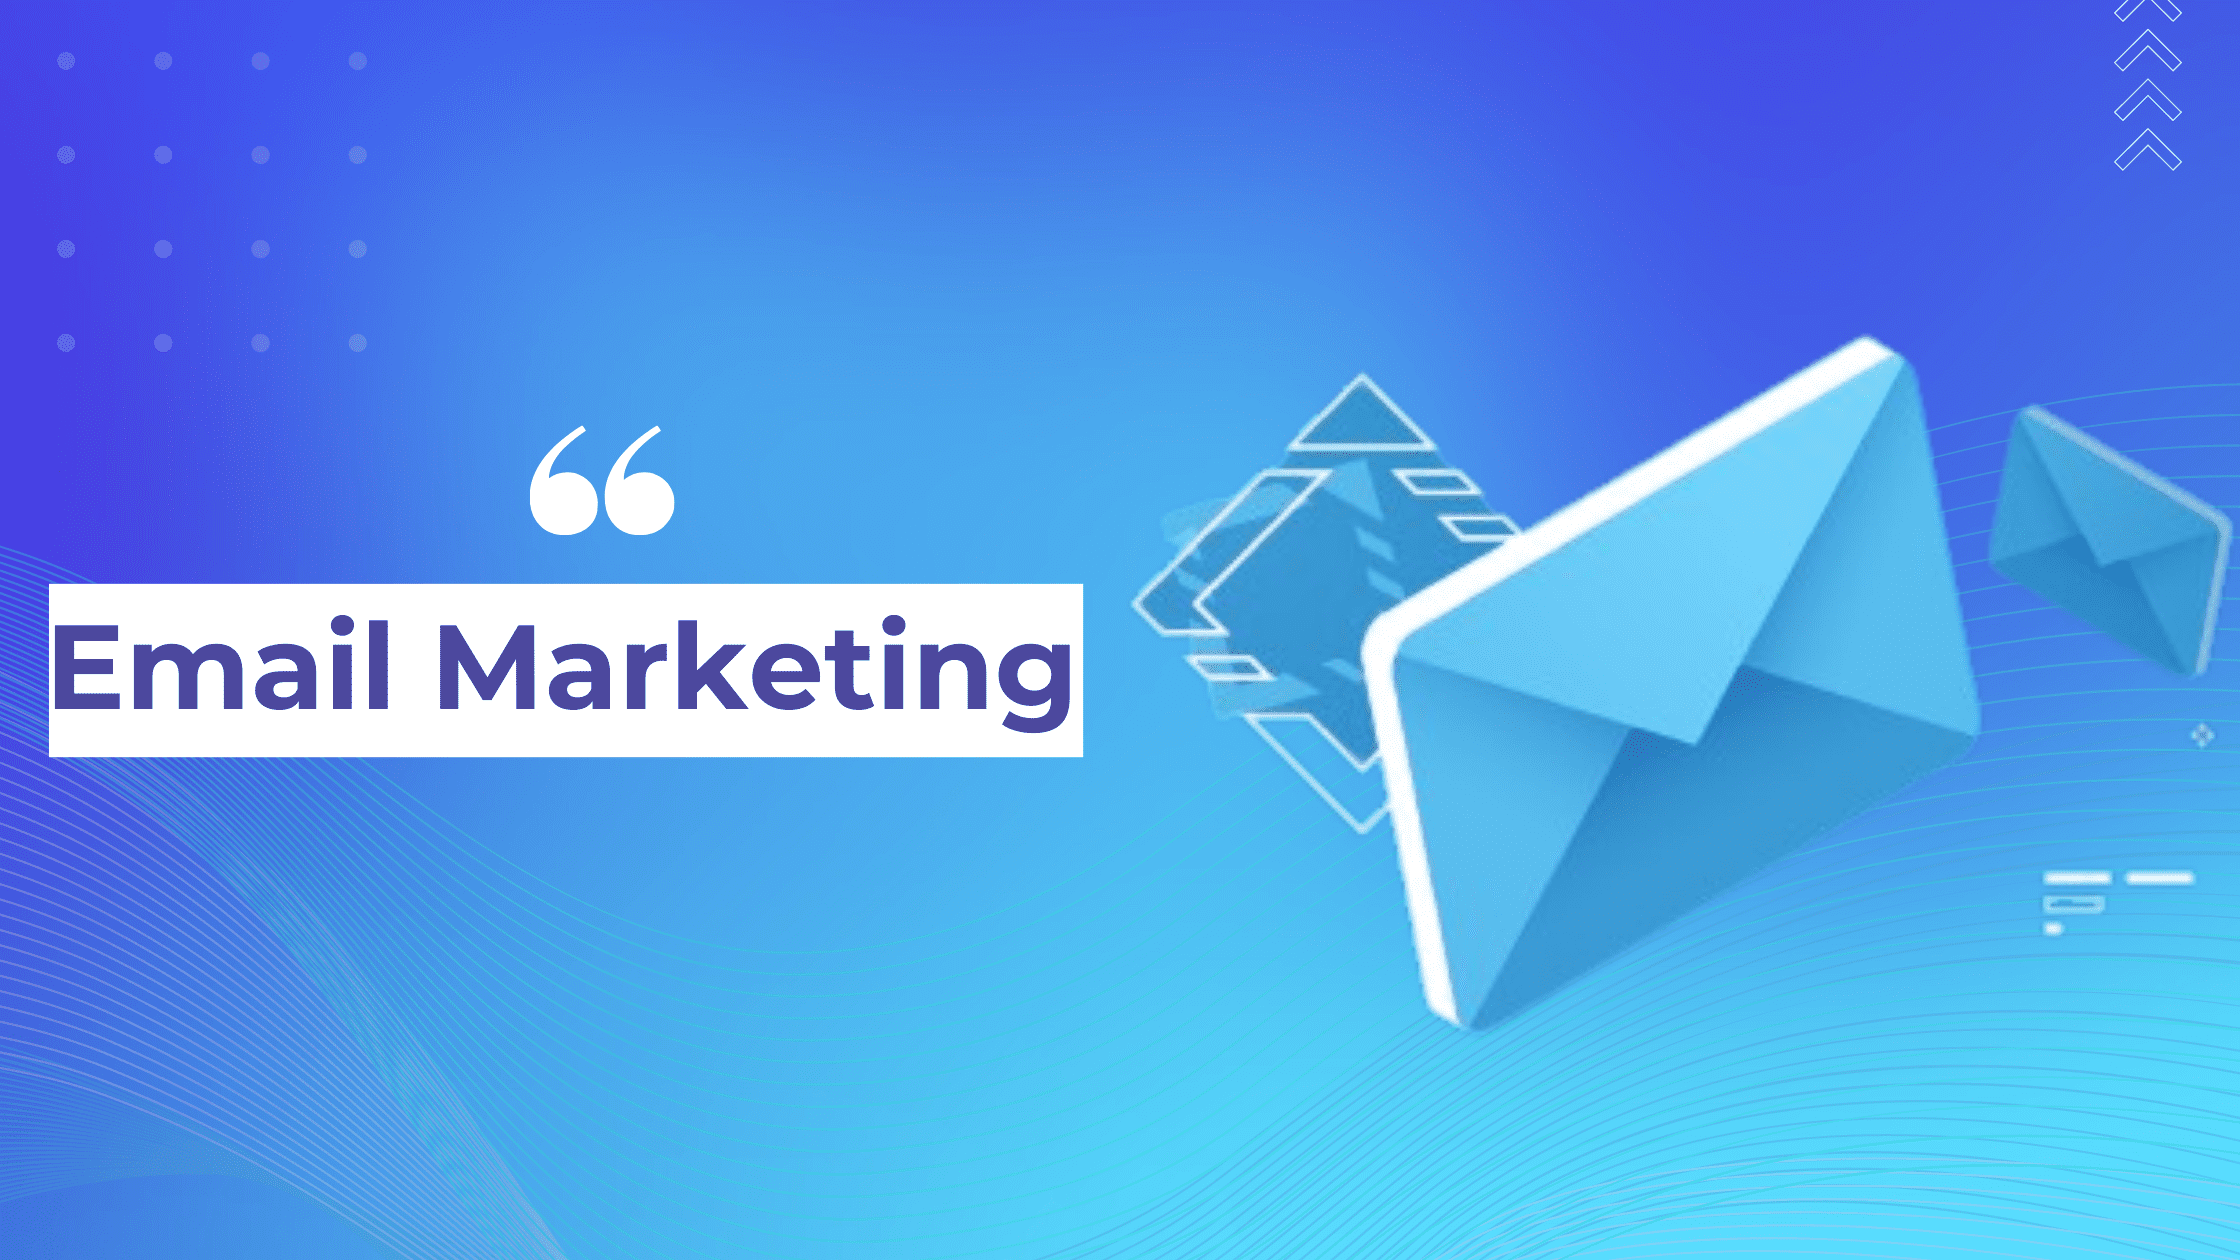 Email Marketing
